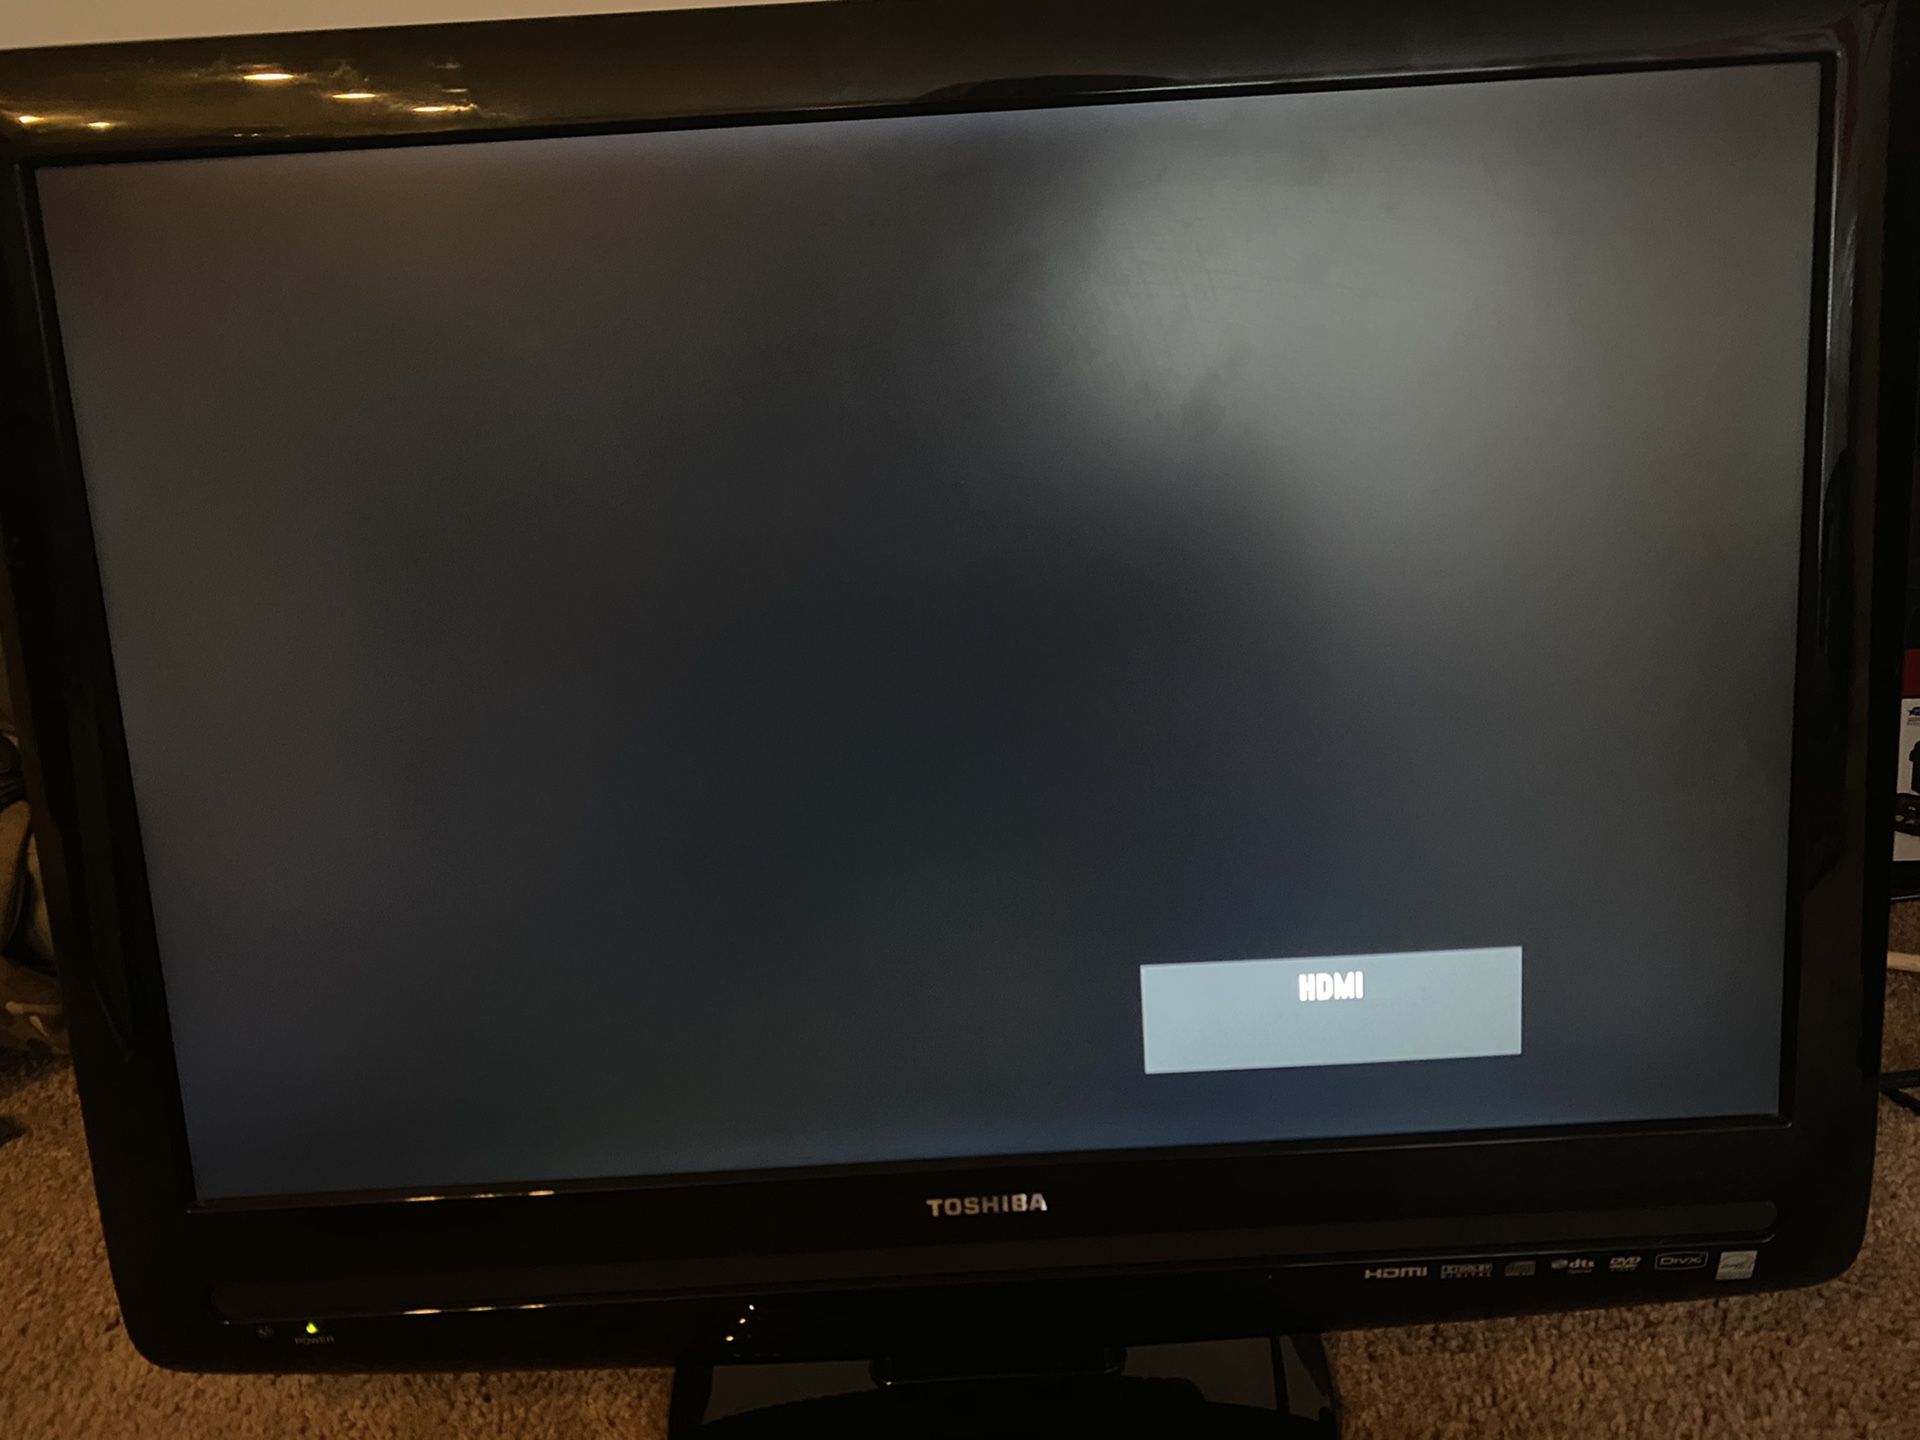 22 inch toshiba TV or gaming monitor with built in DVD player